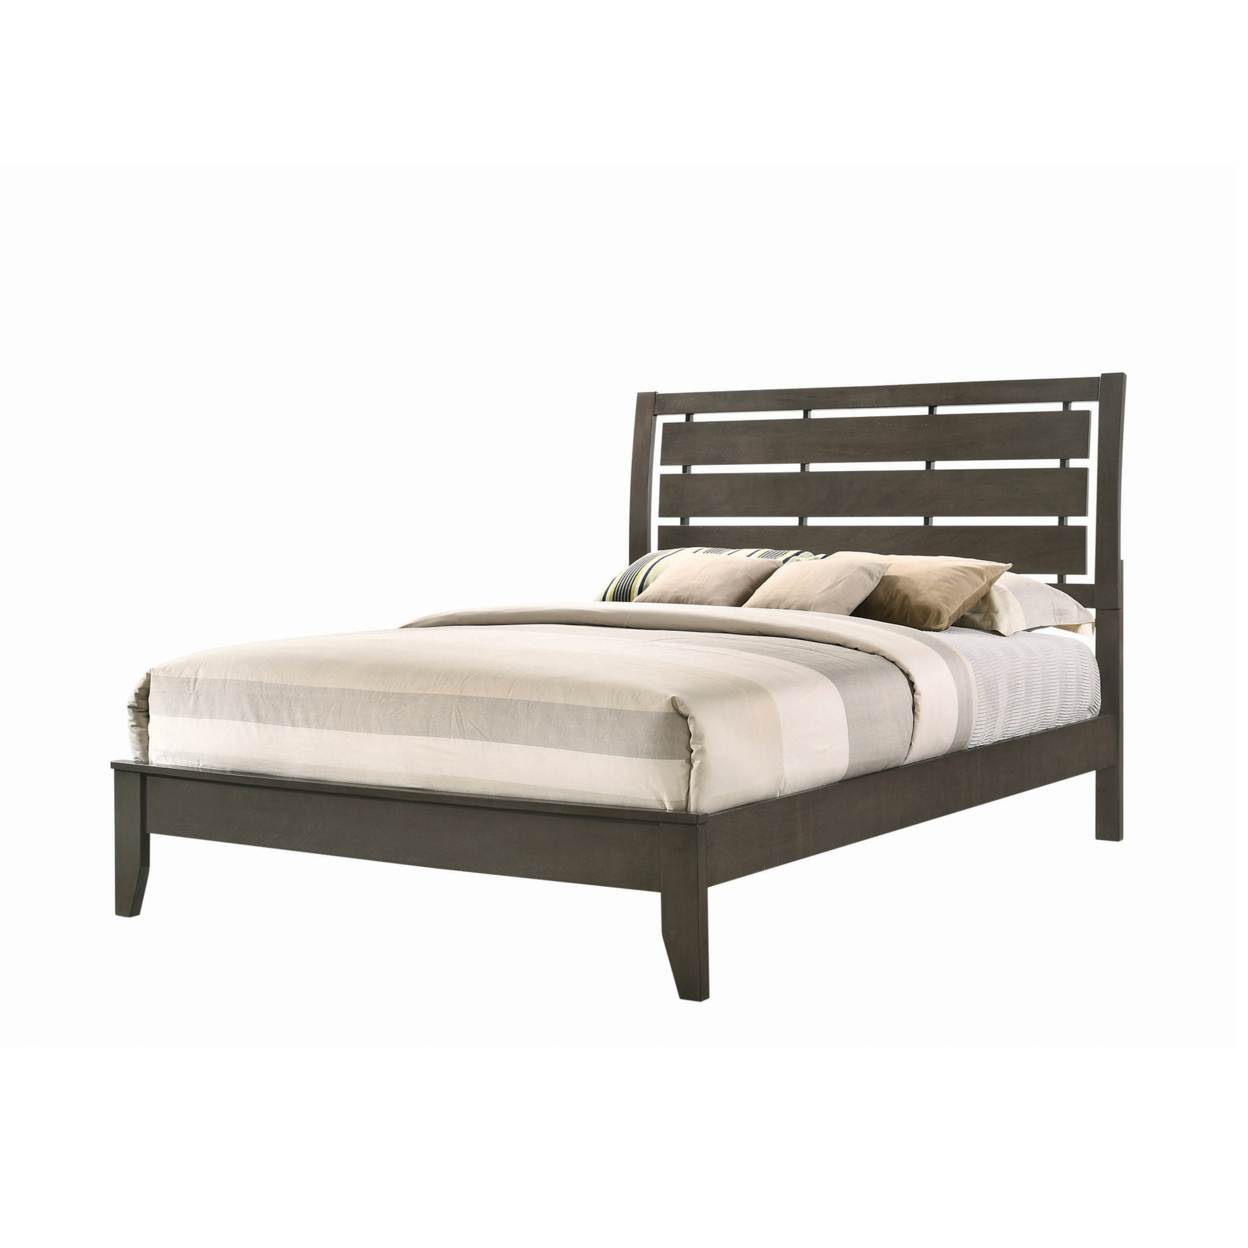 Transitional Wooden Queen Size Bed With Slatted Style Headboard, Gray- Saltoro Sherpi